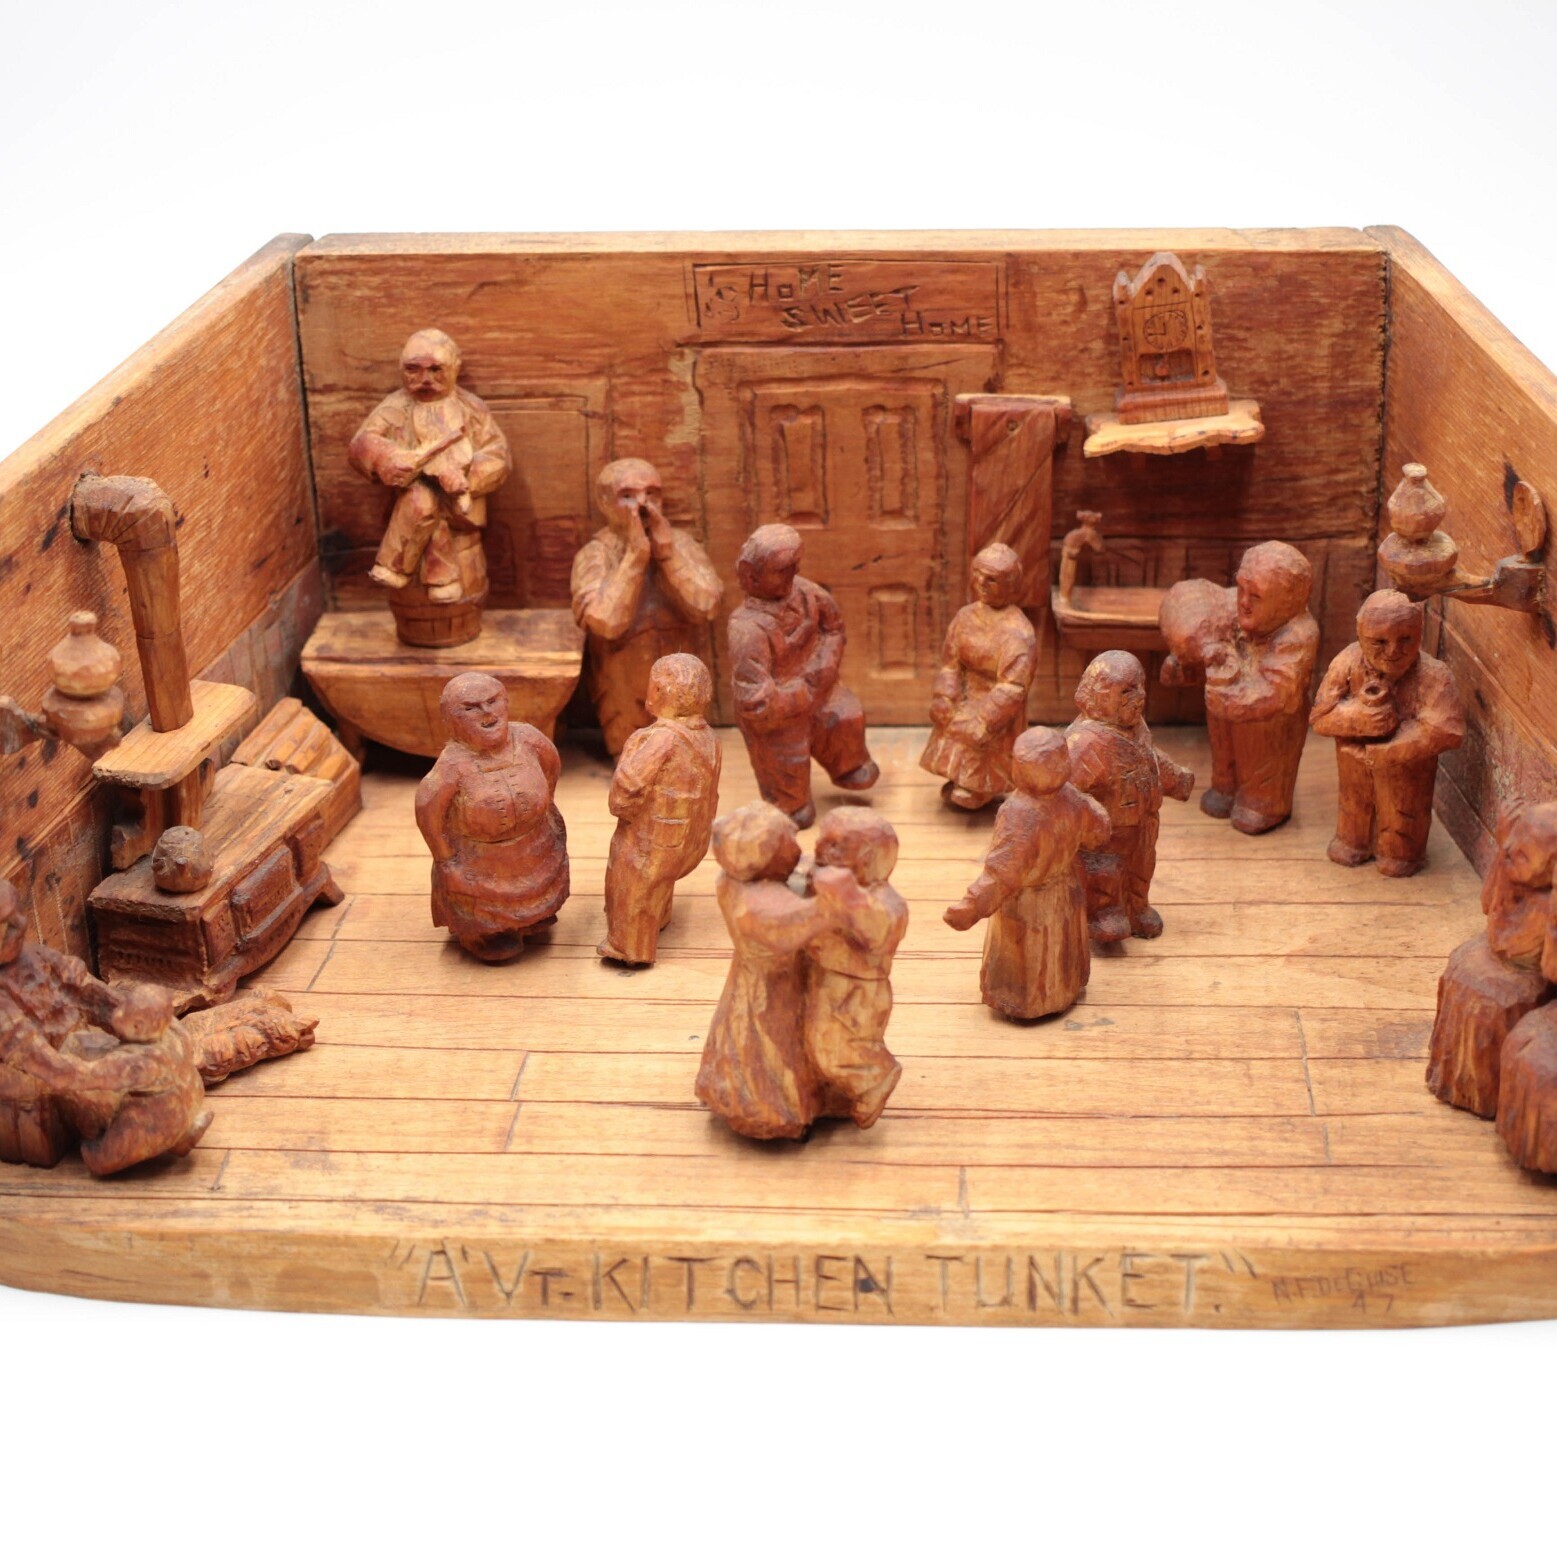 wood carving of 